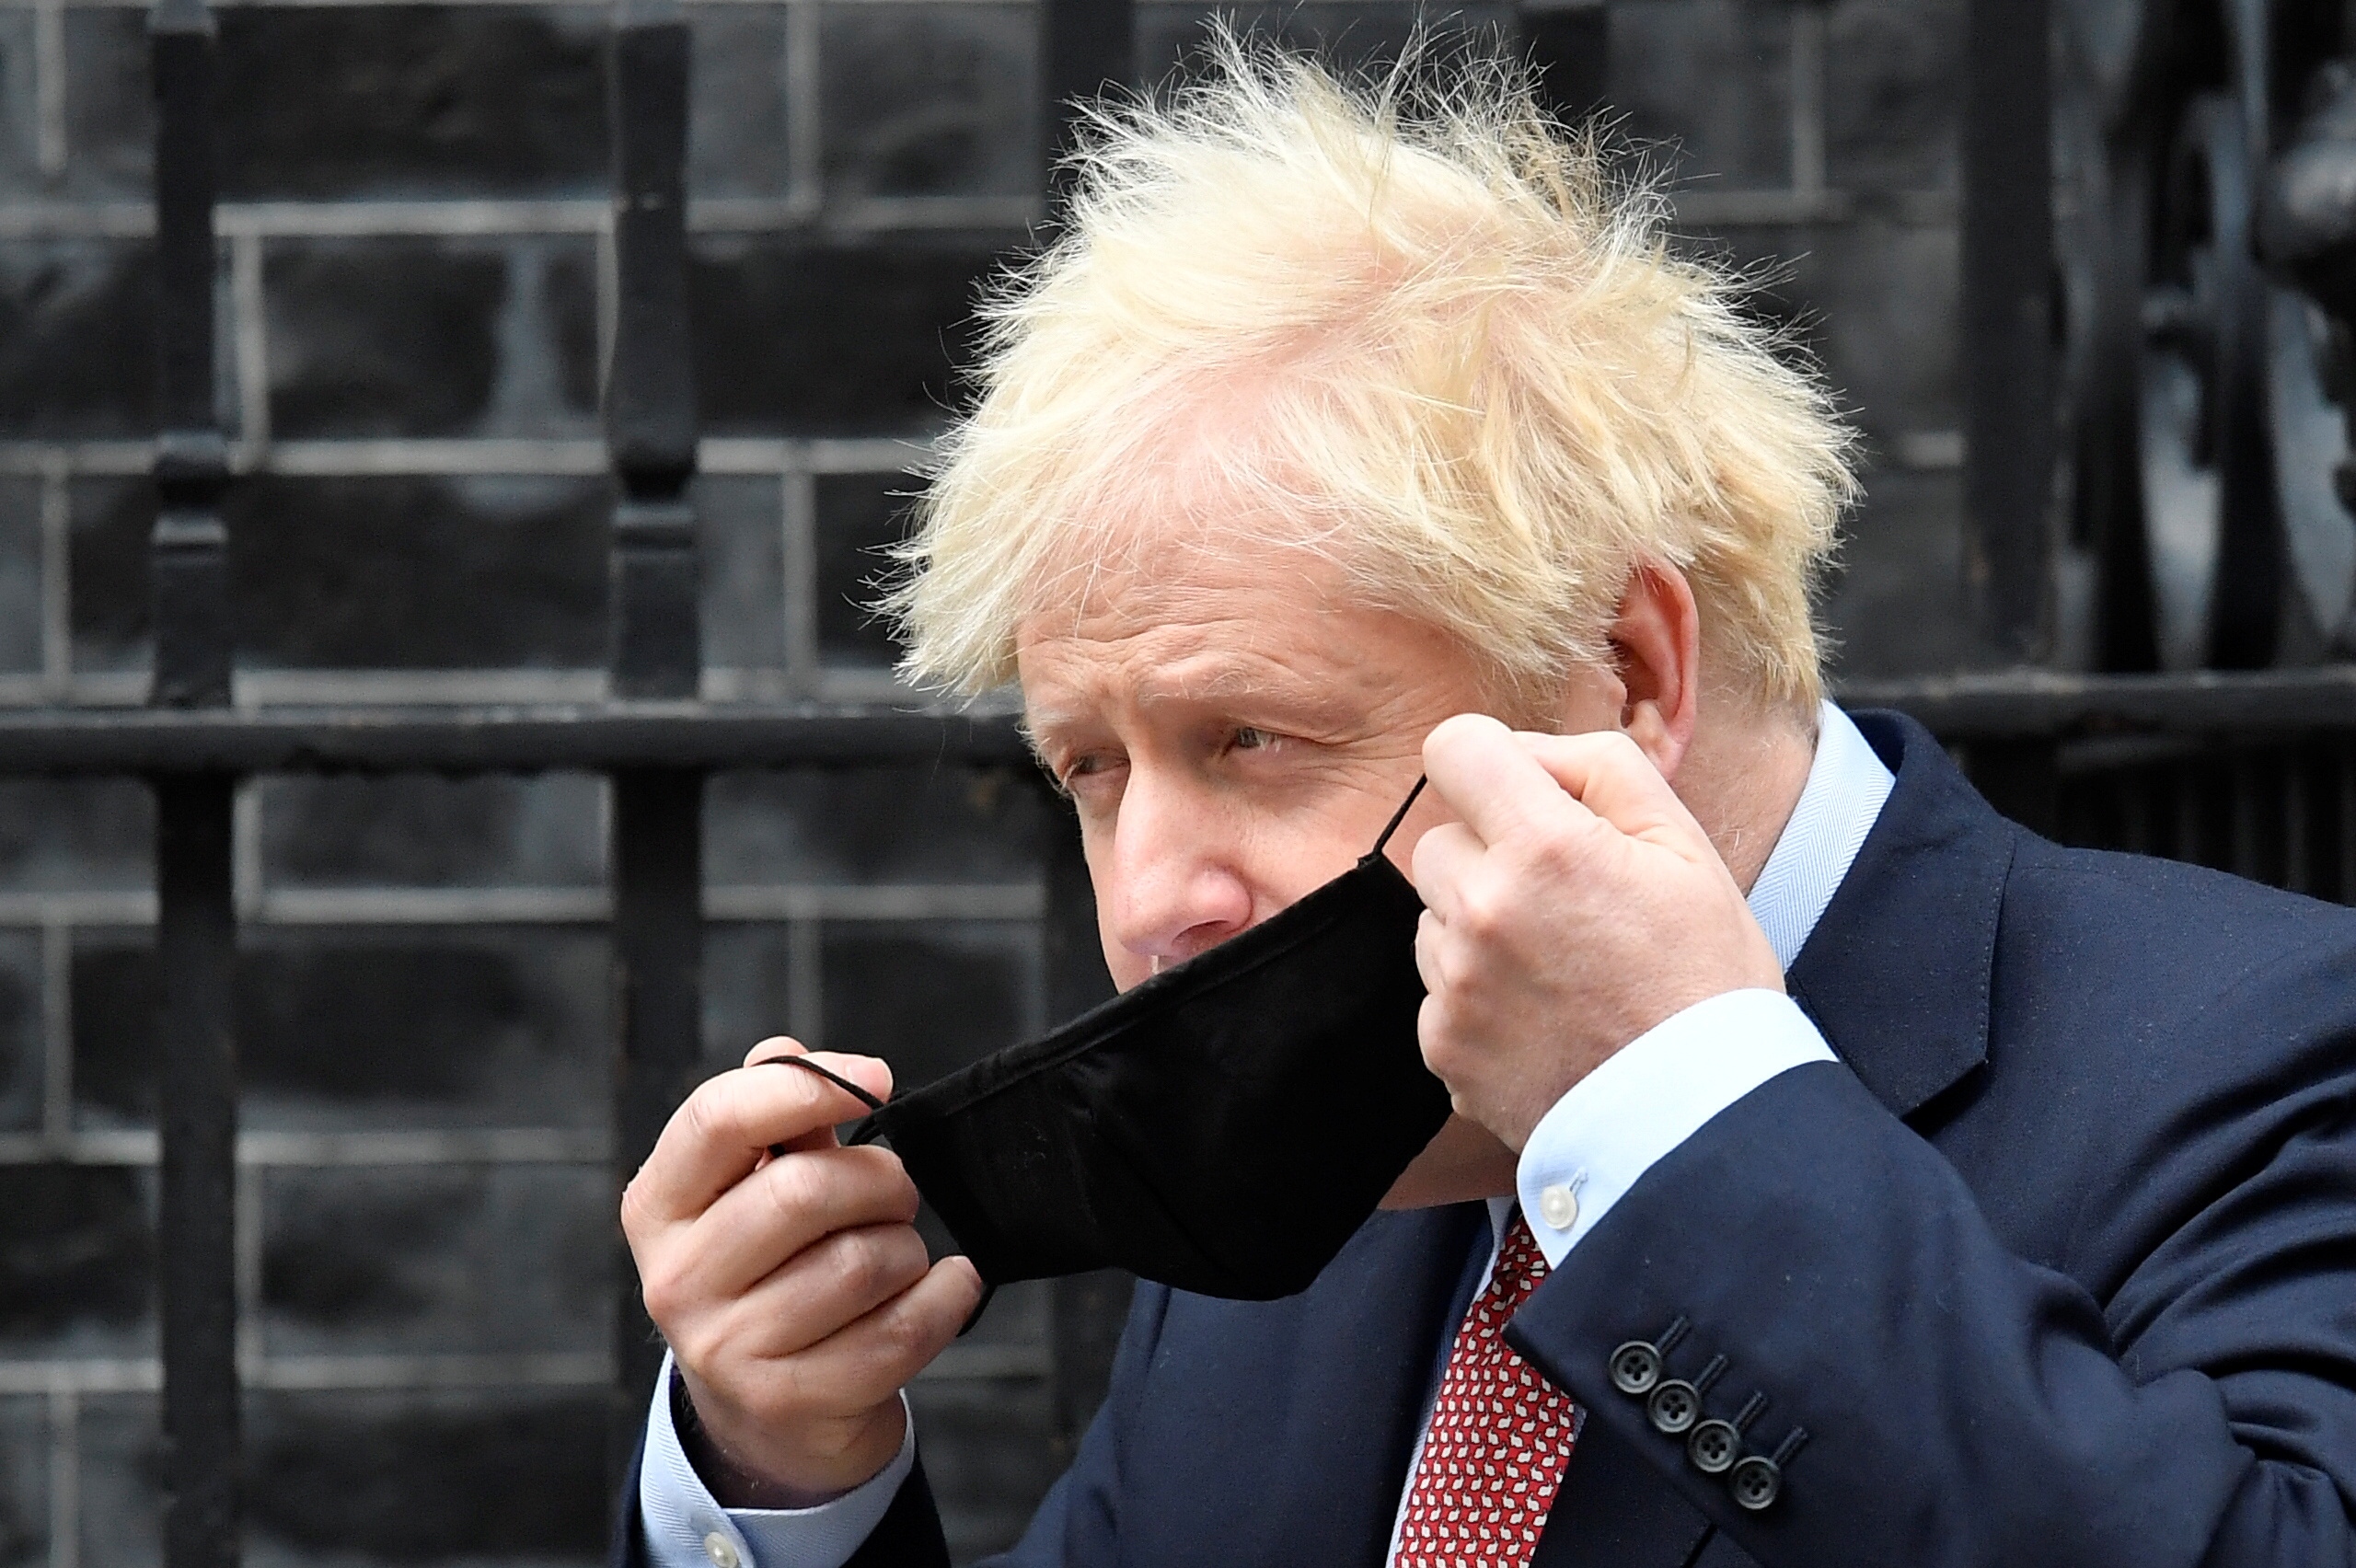 Britain’s Prime Minister Boris Johnson leaves Downing Street Britain?s Prime Minister Boris Johnson puts on a face mask as he leaves Downing Street to deliver his Conservative Party Conference virtual keynote speech, in London, Britain, October 6, 2020. REUTERS/Toby Melville TOBY MELVILLE